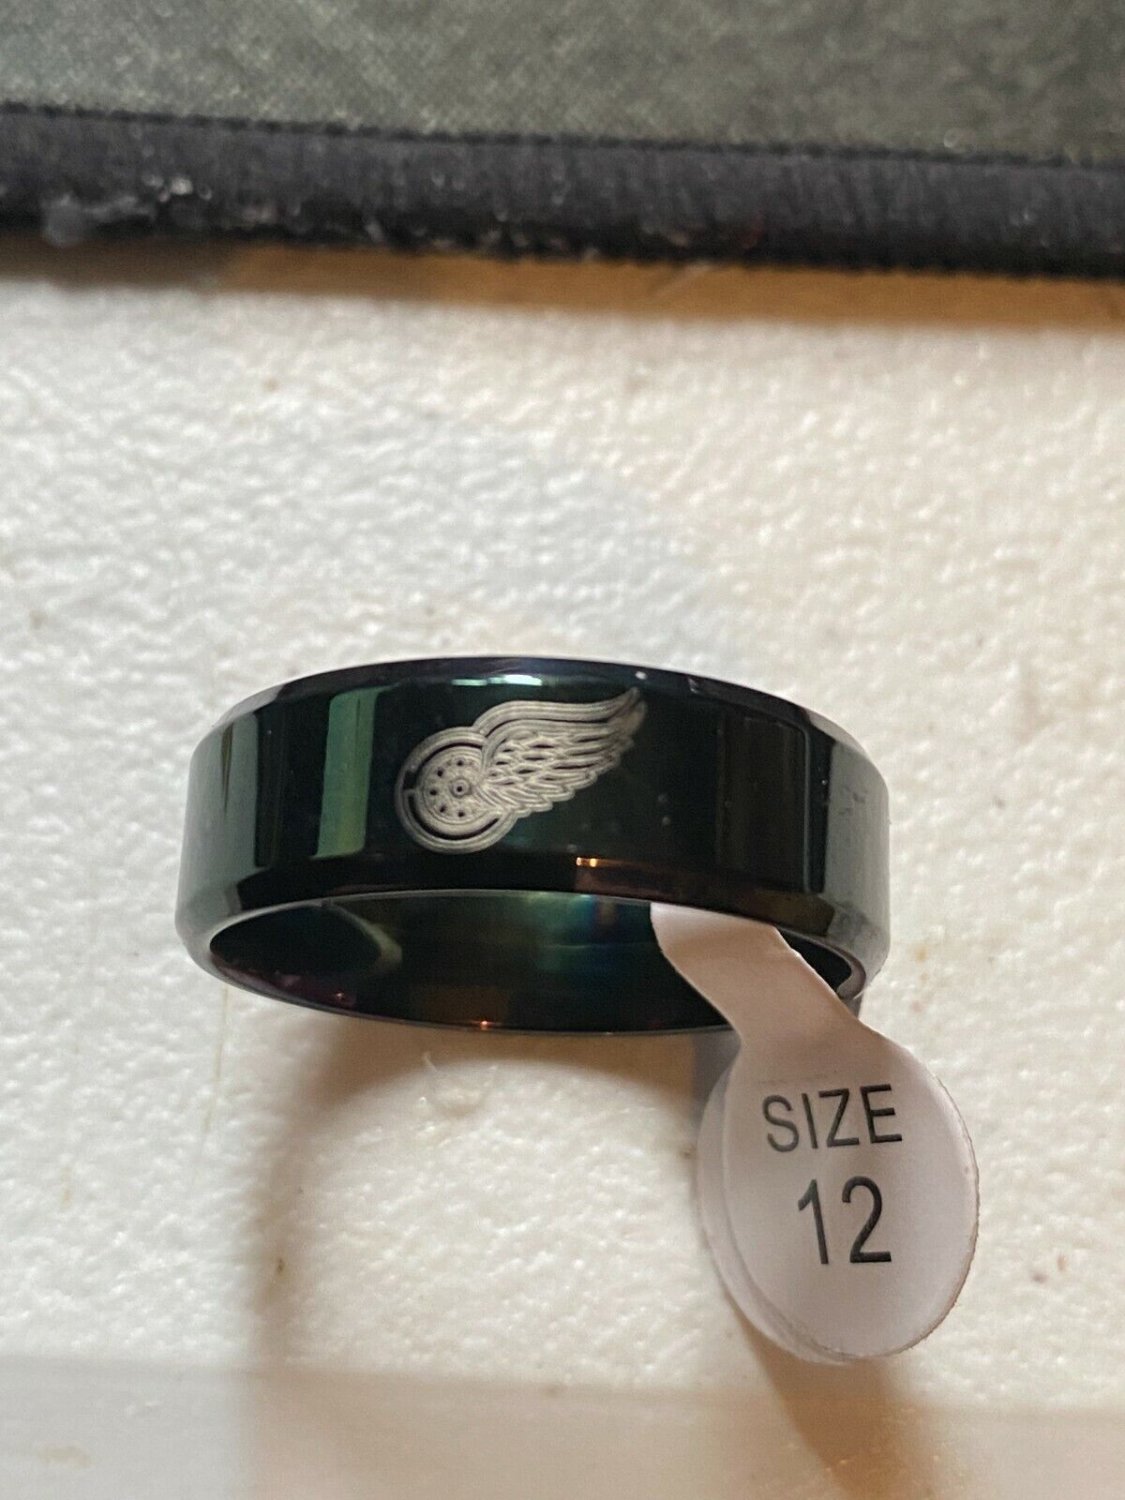 Detroit Red Wings titanium ring size 12